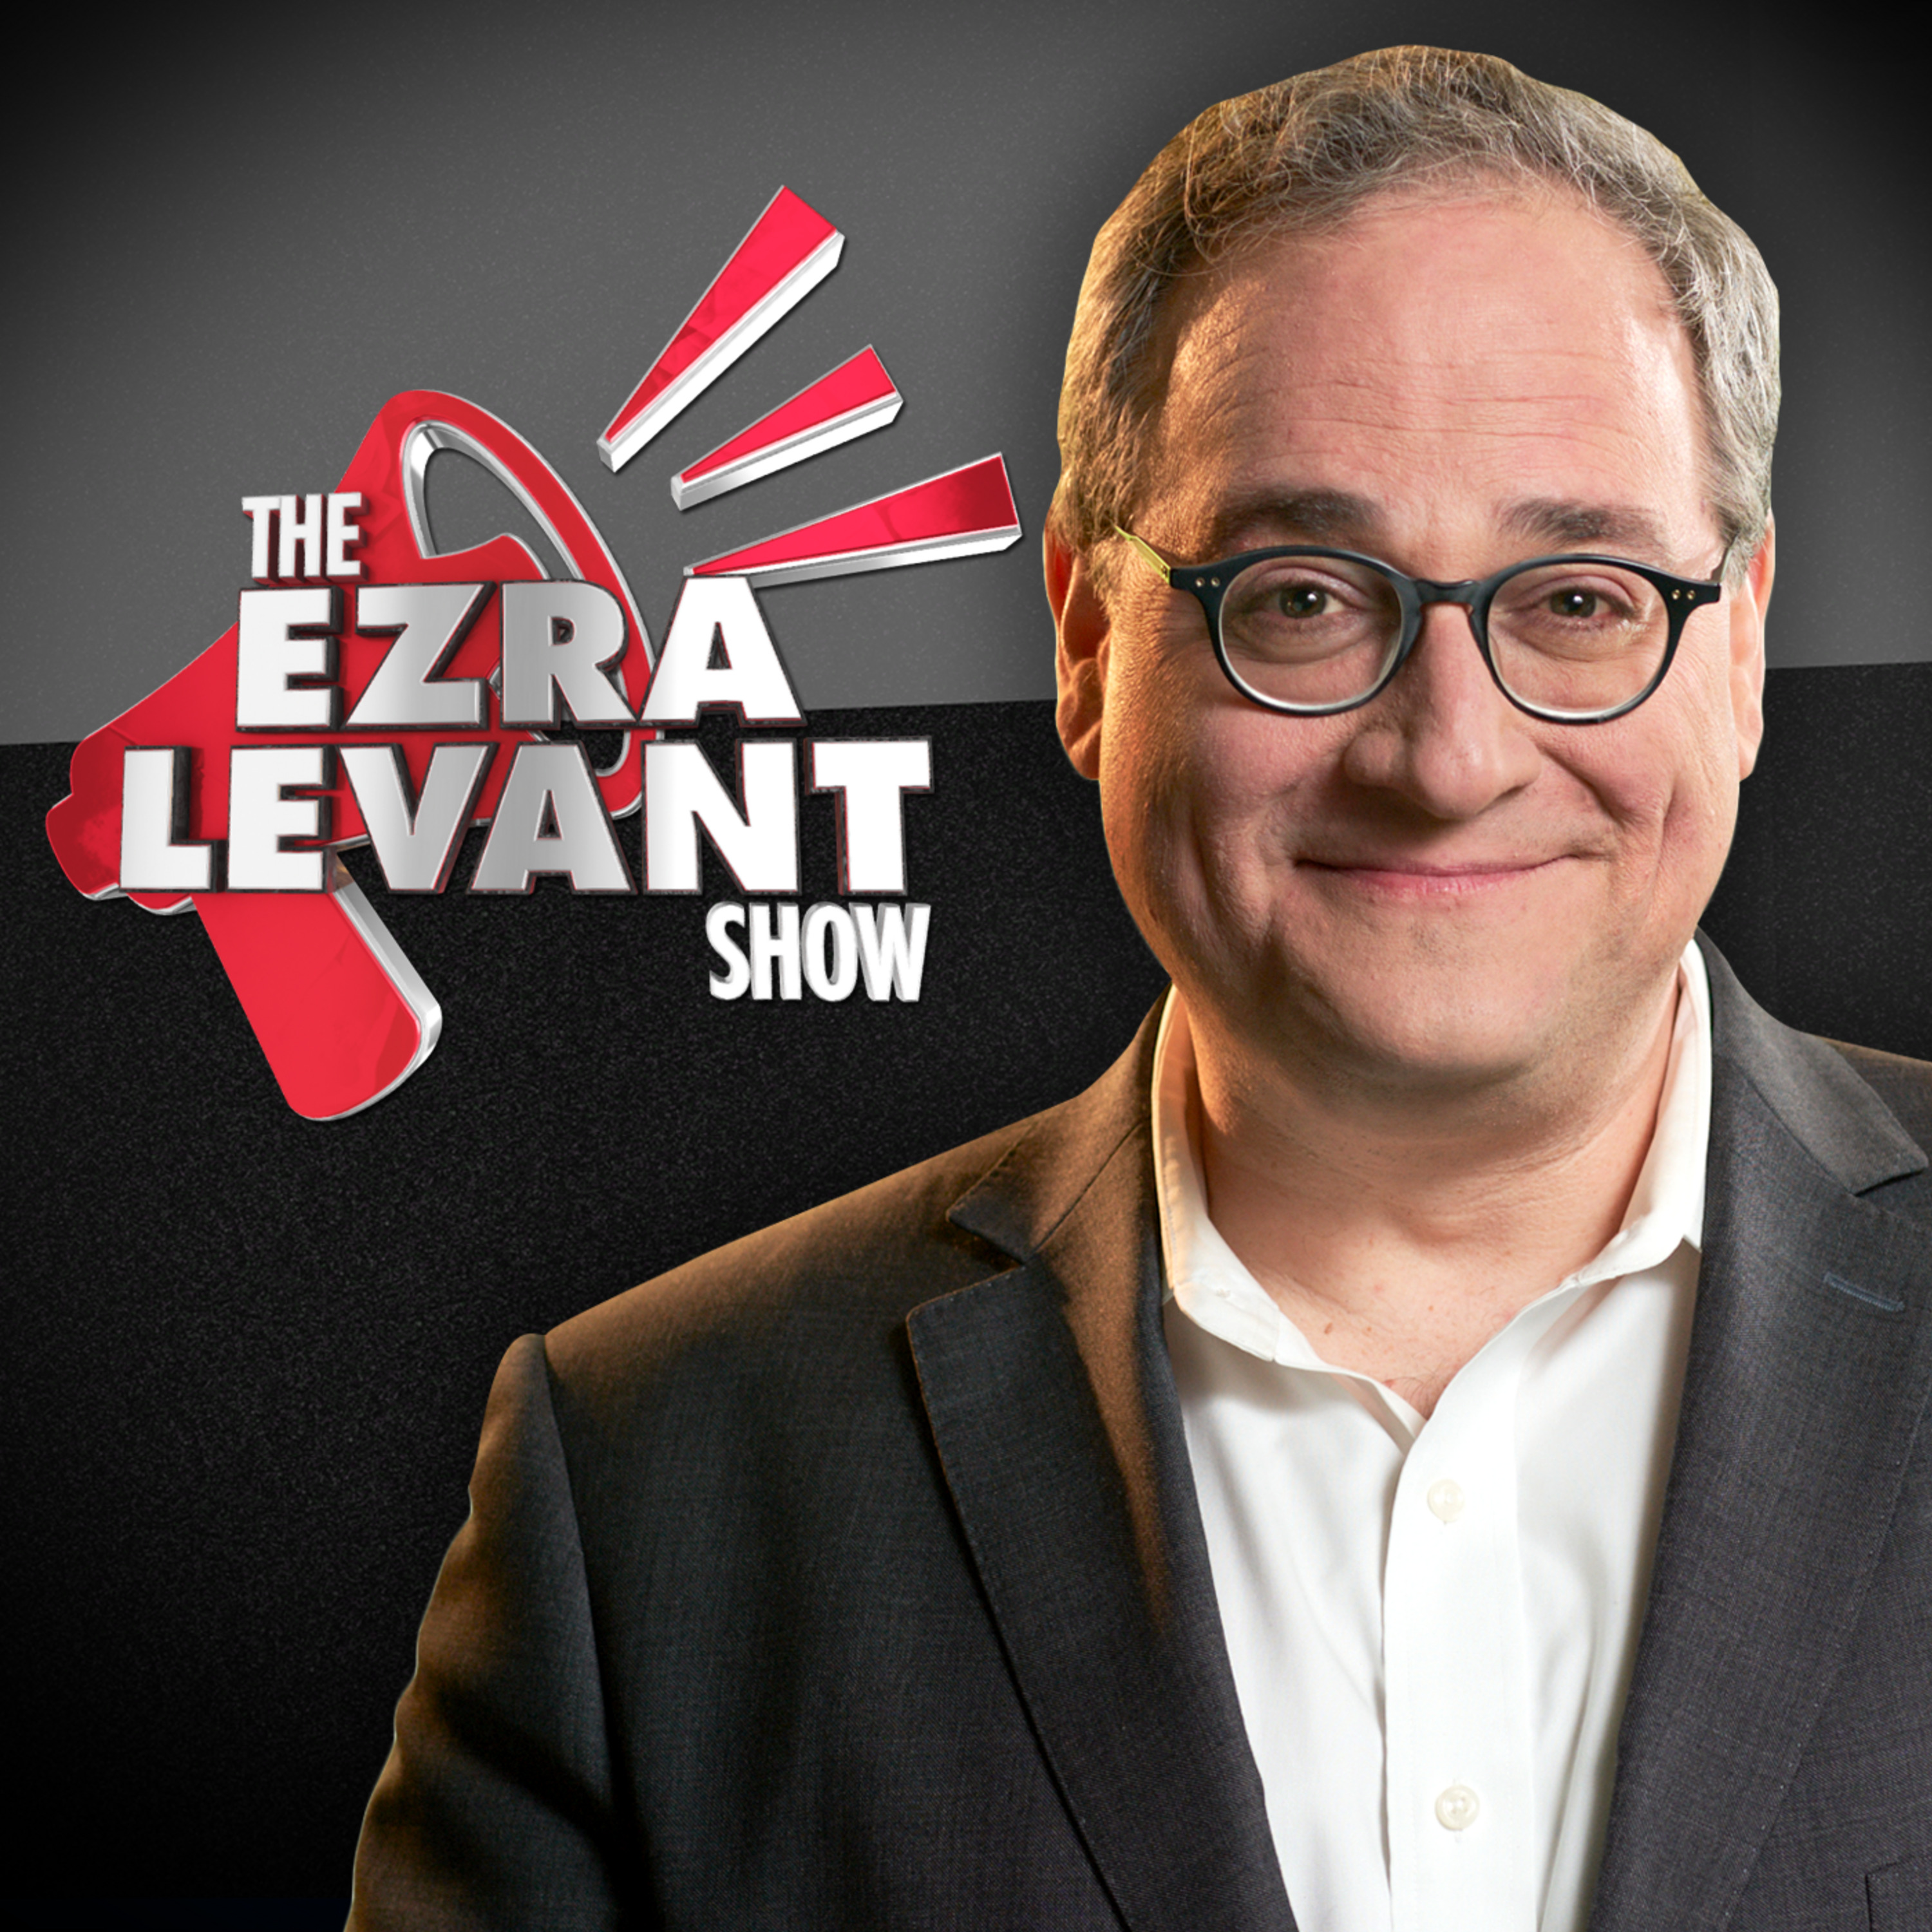 EZRA LEVANT | A heartbreaking and infuriating interview with a victim of child sexual exploitation in the United Kingdom